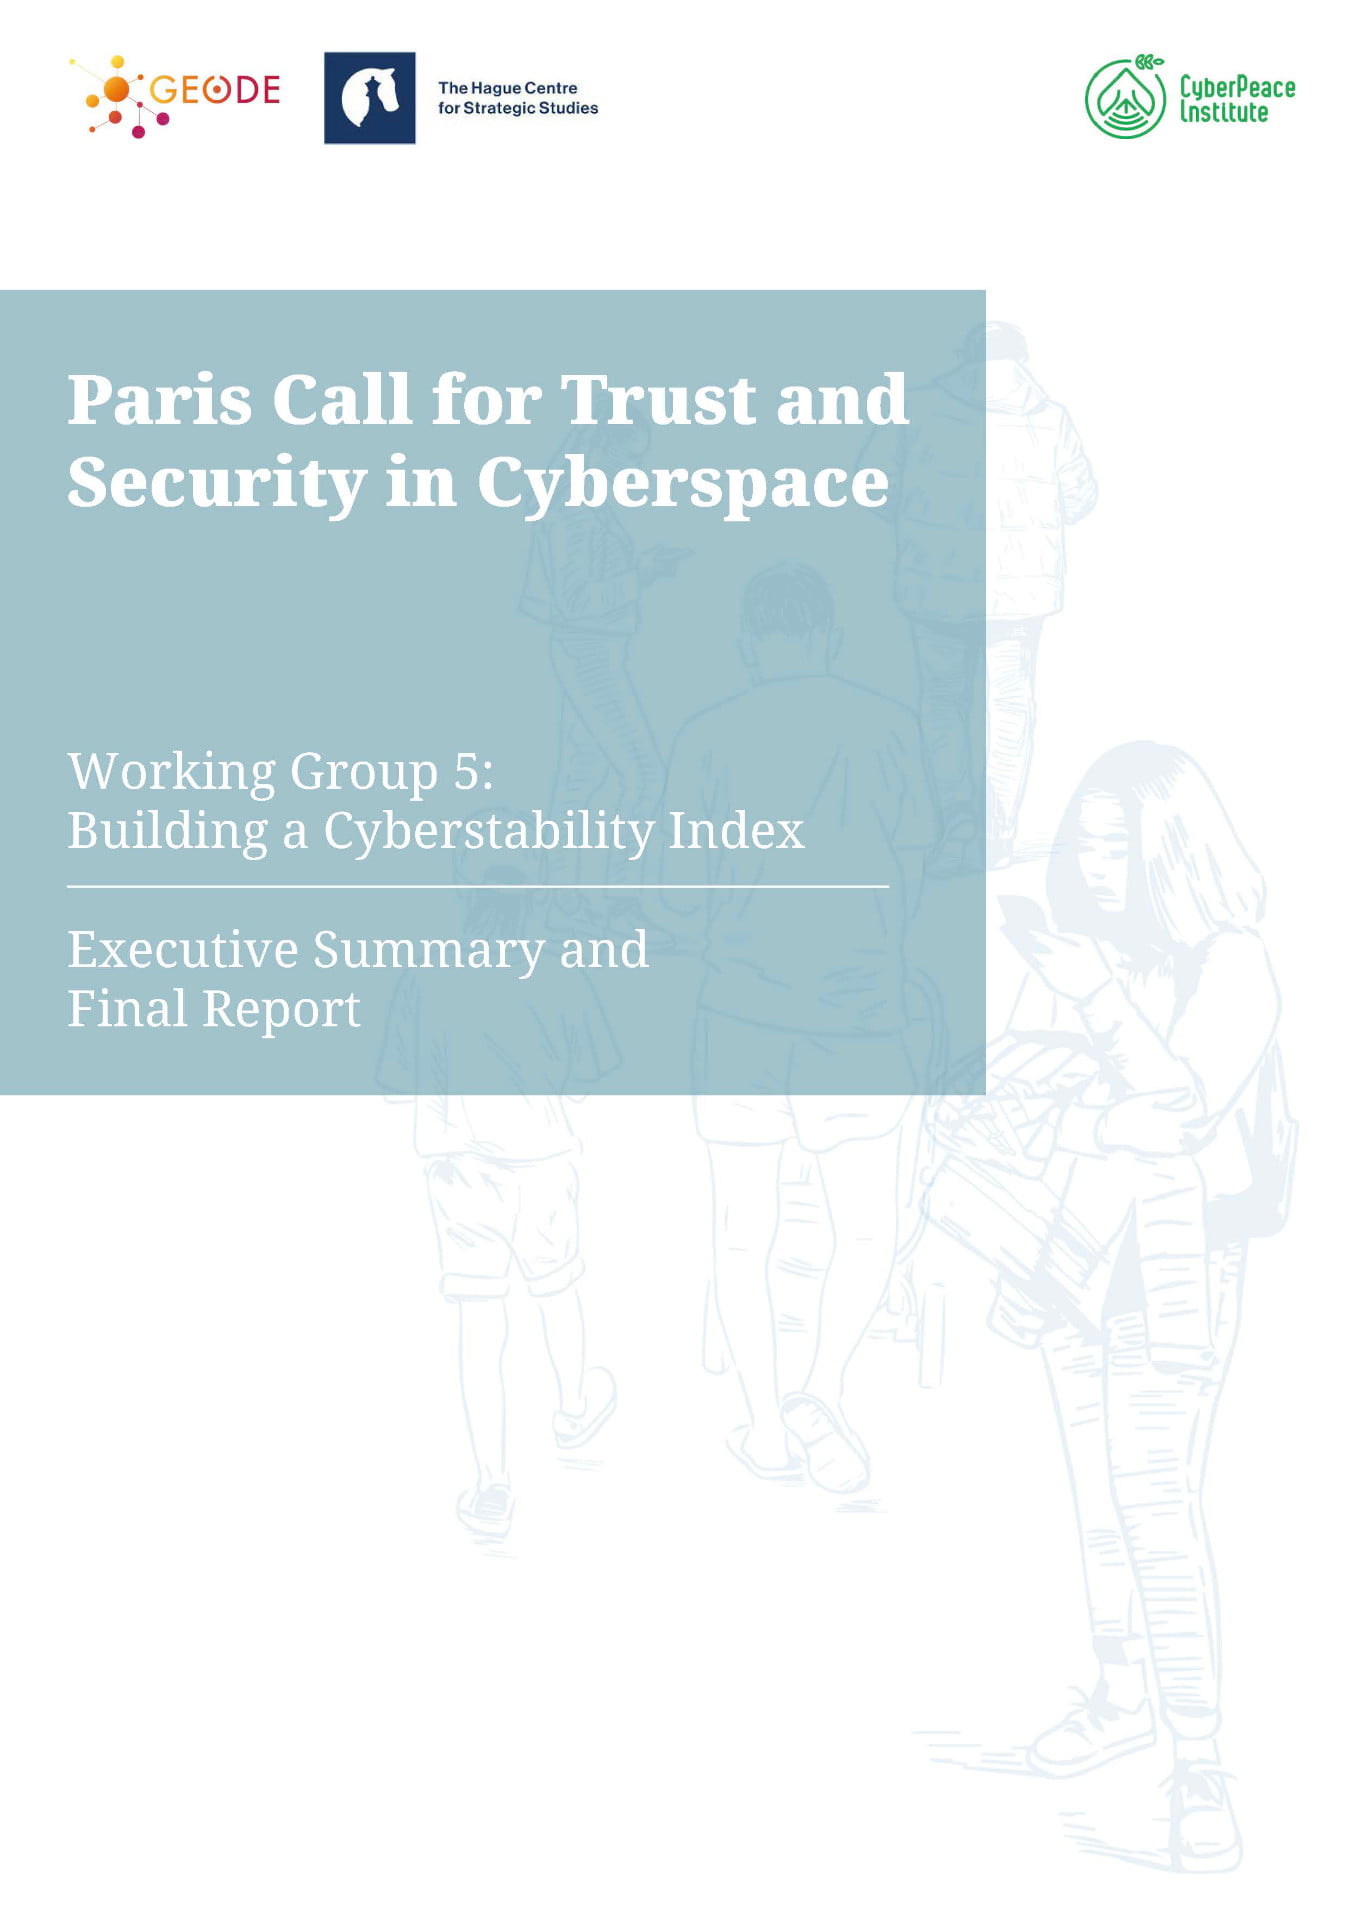 Paris Call for Trust and Security in Cyberspace Working Group 5 Building a Cyberstability Index Final Report